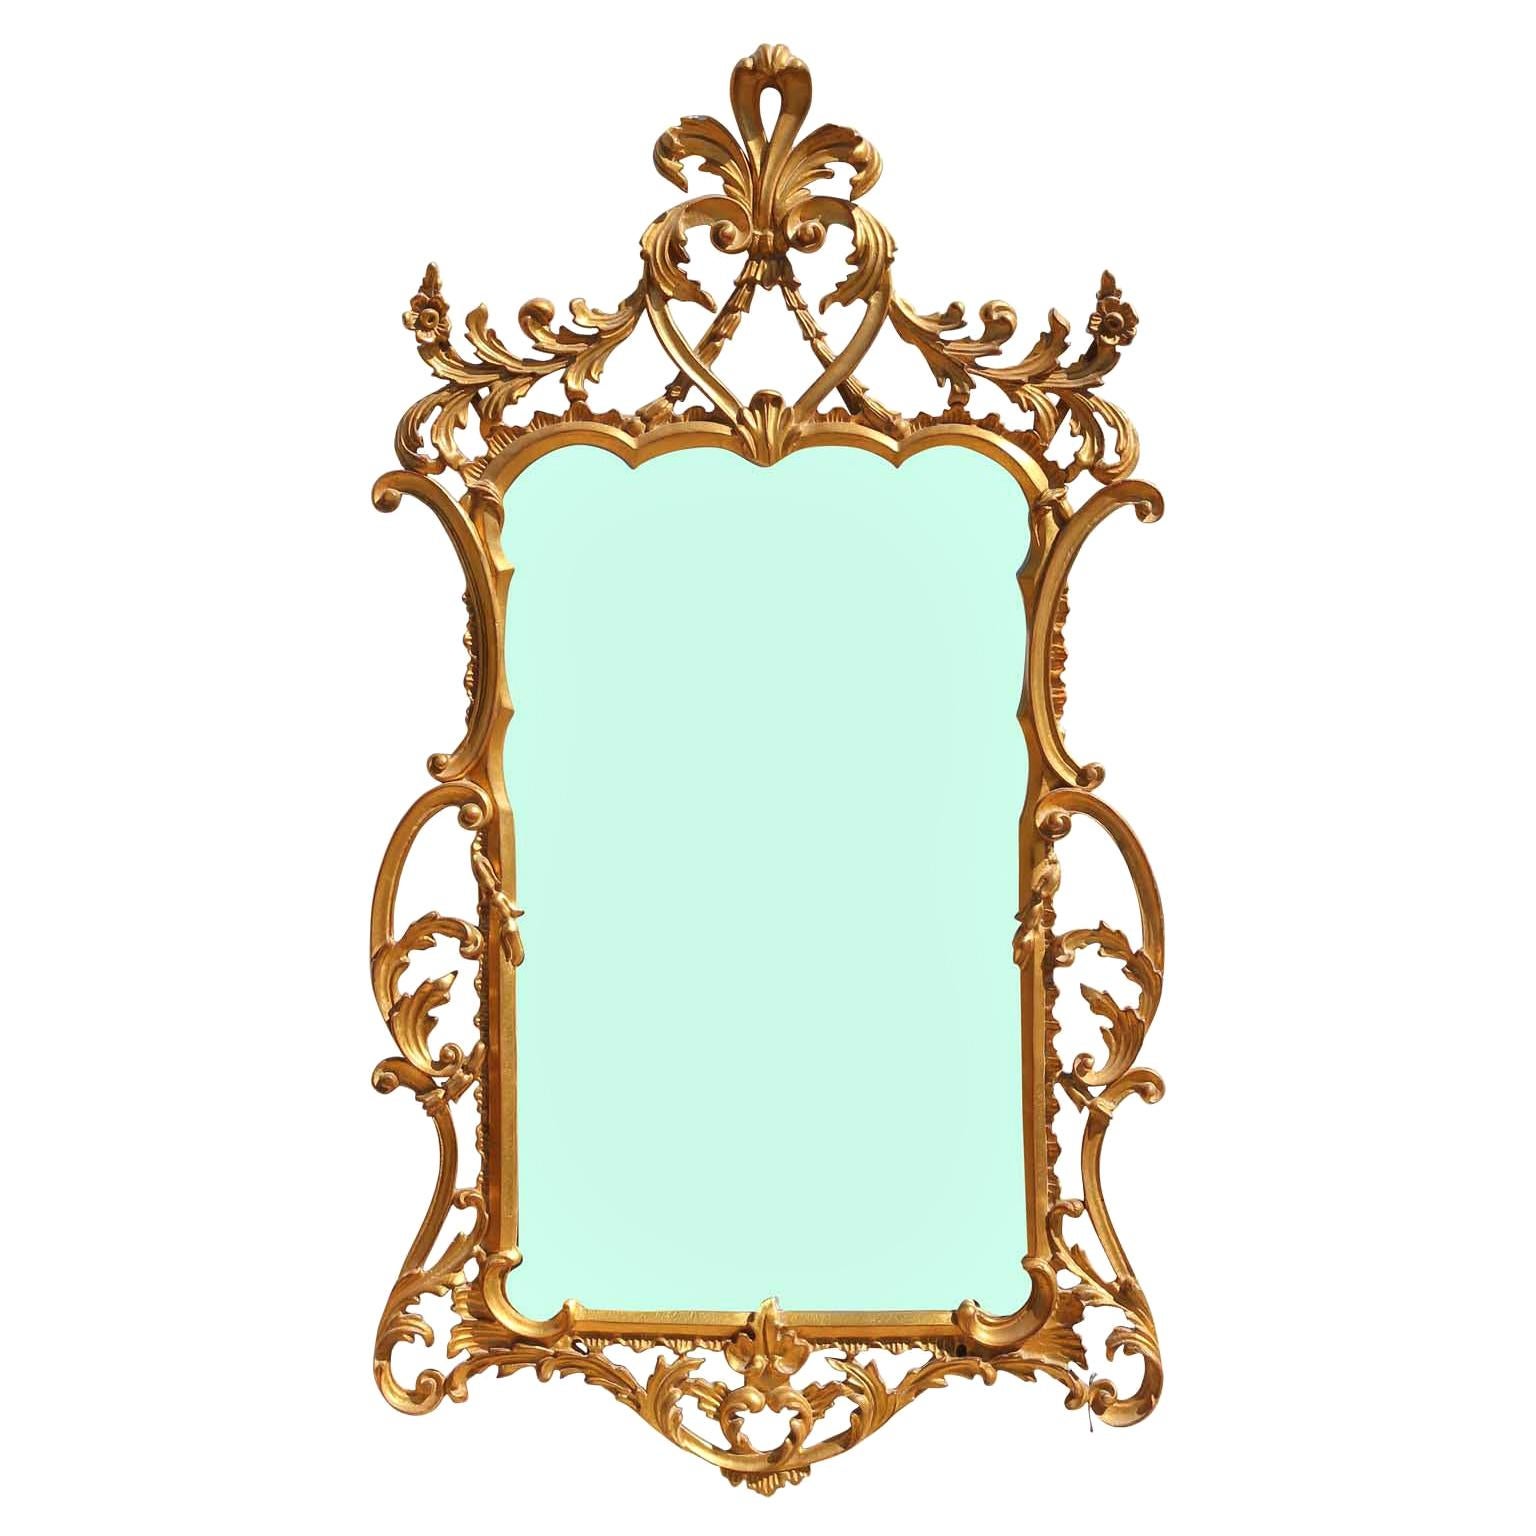 Wonderful Gold Louis Style French Ornate Mirror